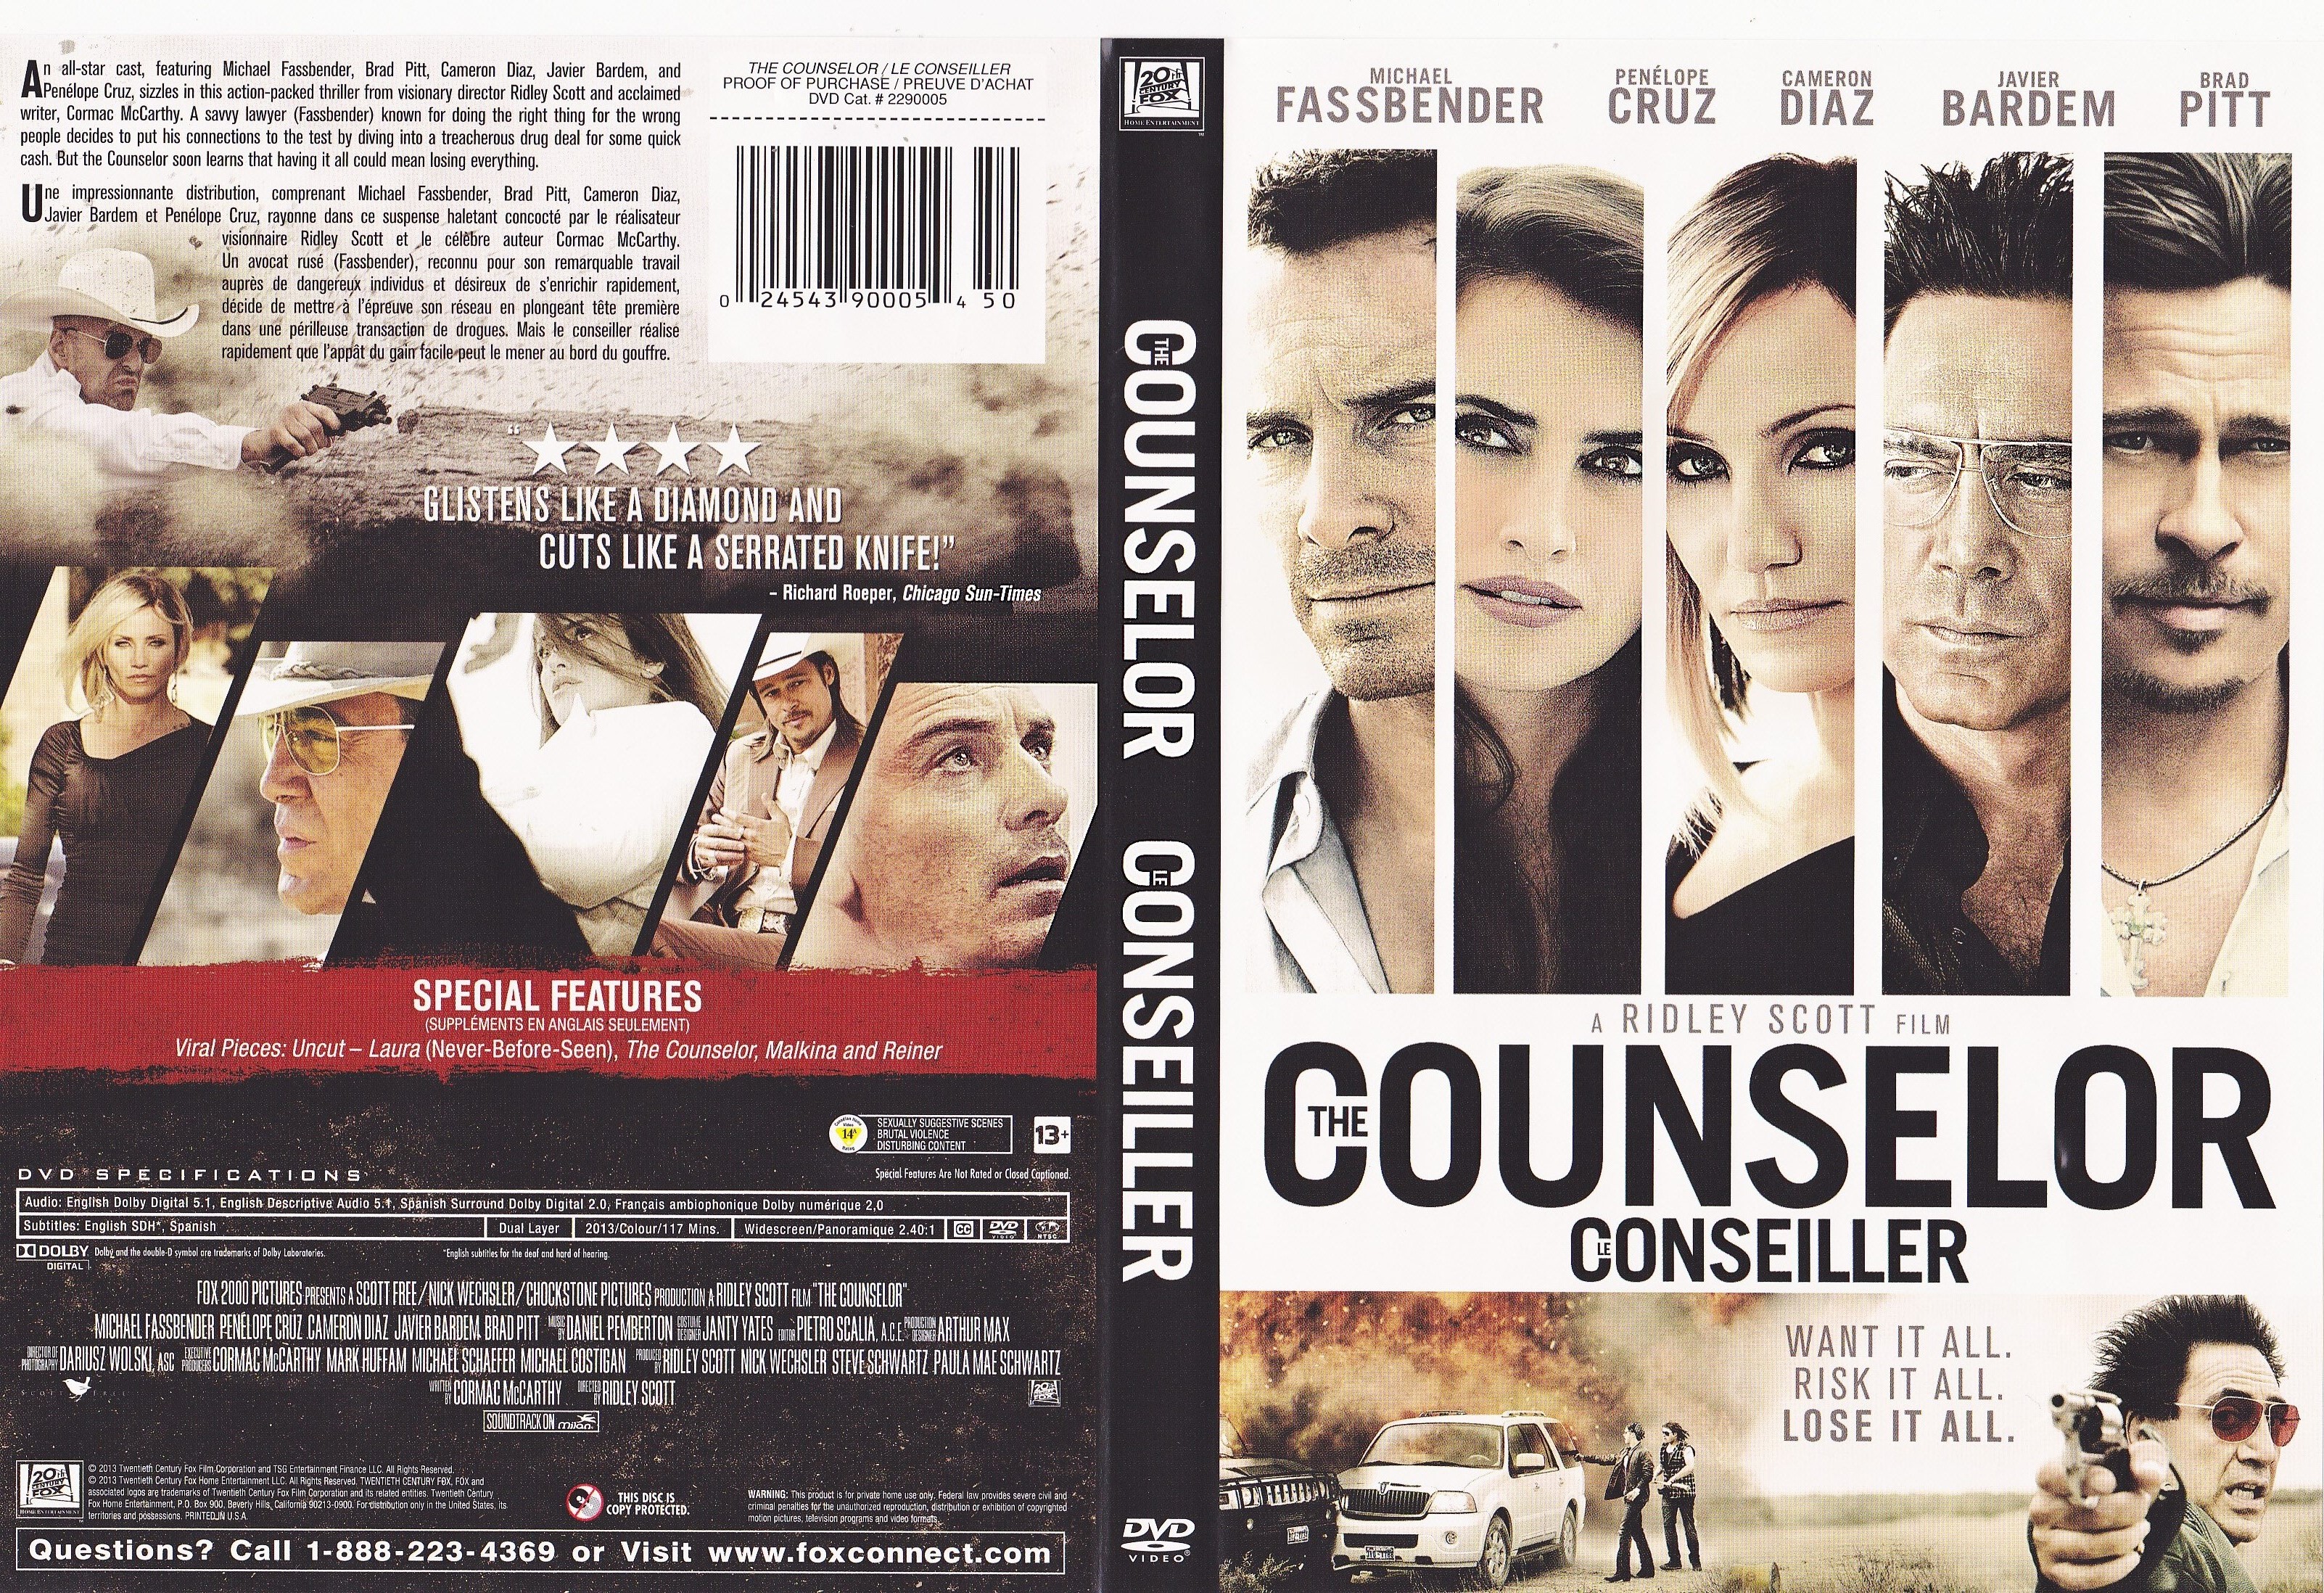 Jaquette DVD Le conseiller - The counselor (canadienne)